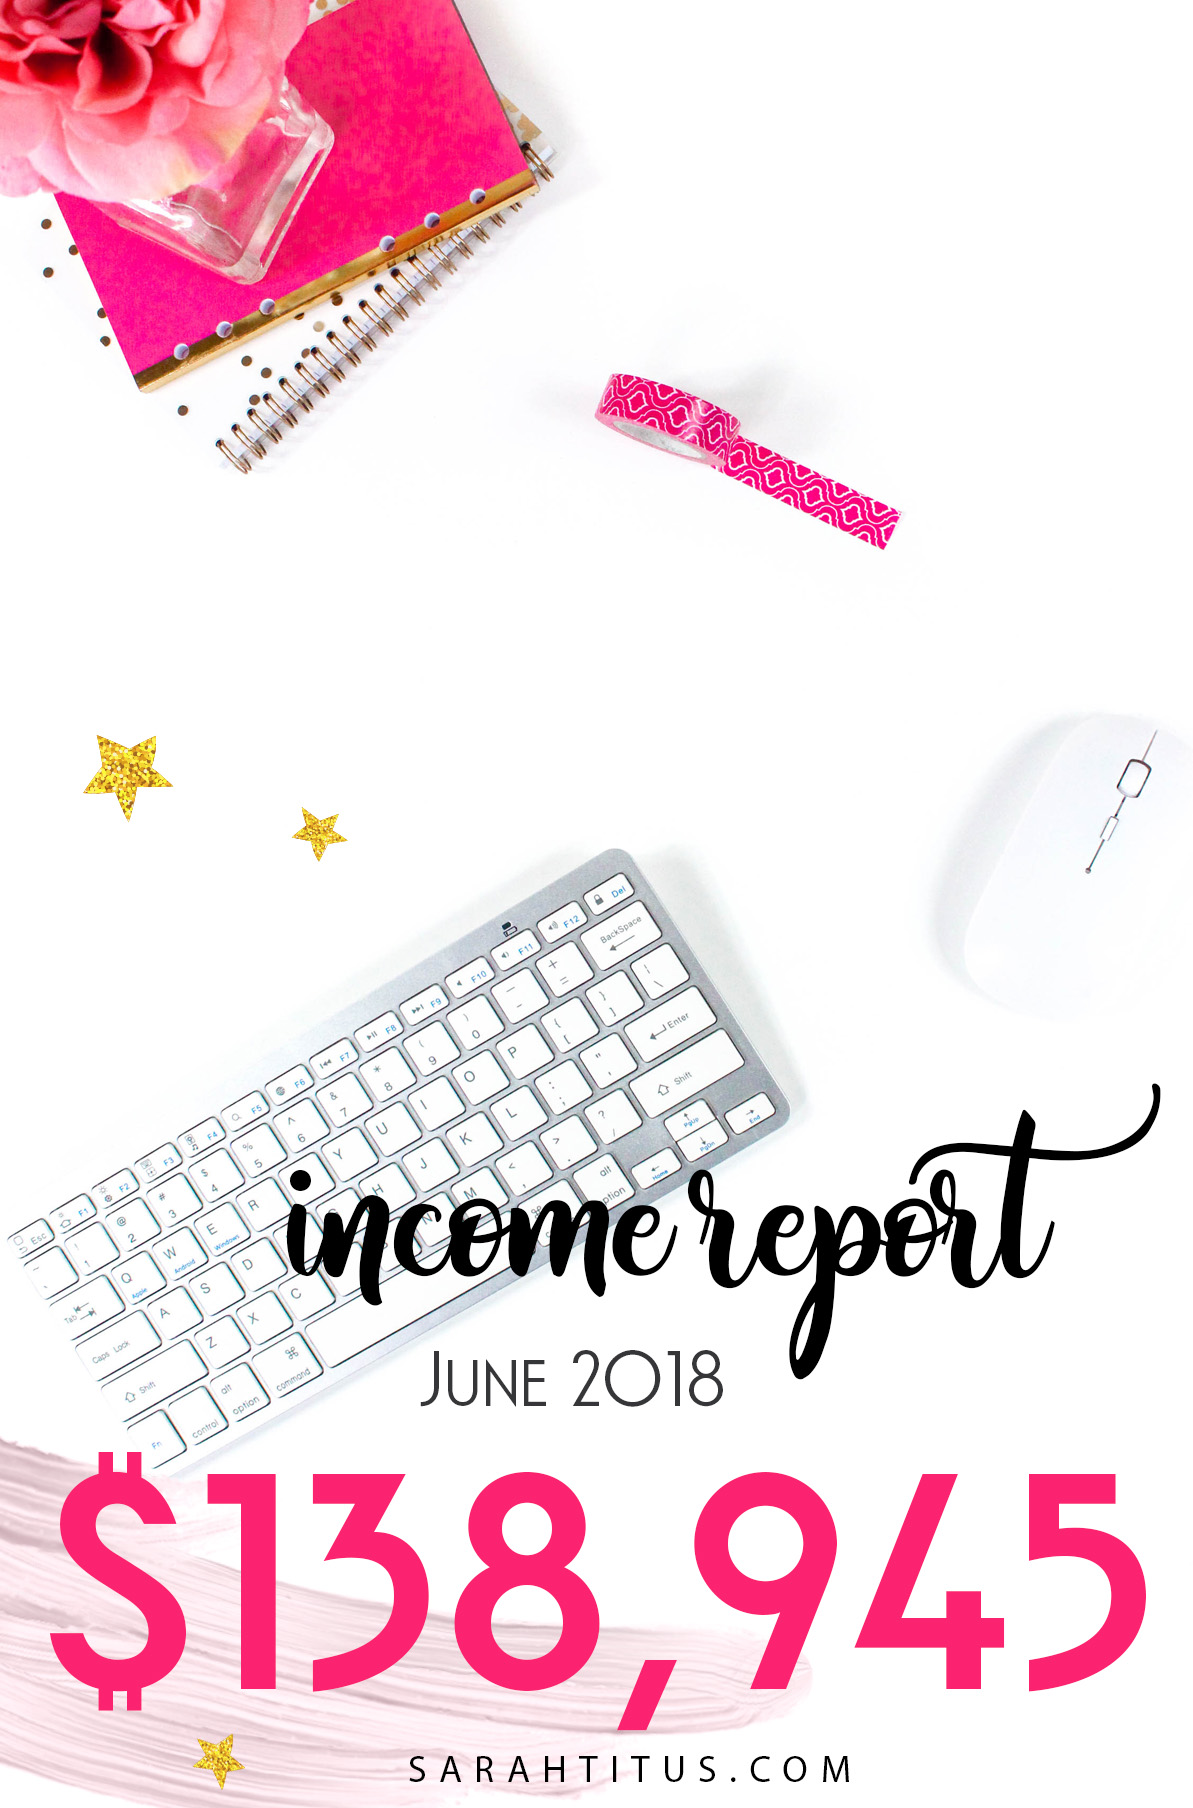 Before I started blogging, I was making $18k/YEAR. I made more than 7x that amount last MONTH ALONE! I'm just as shocked as you are. Blogging has changed my life forever and it can change yours too!